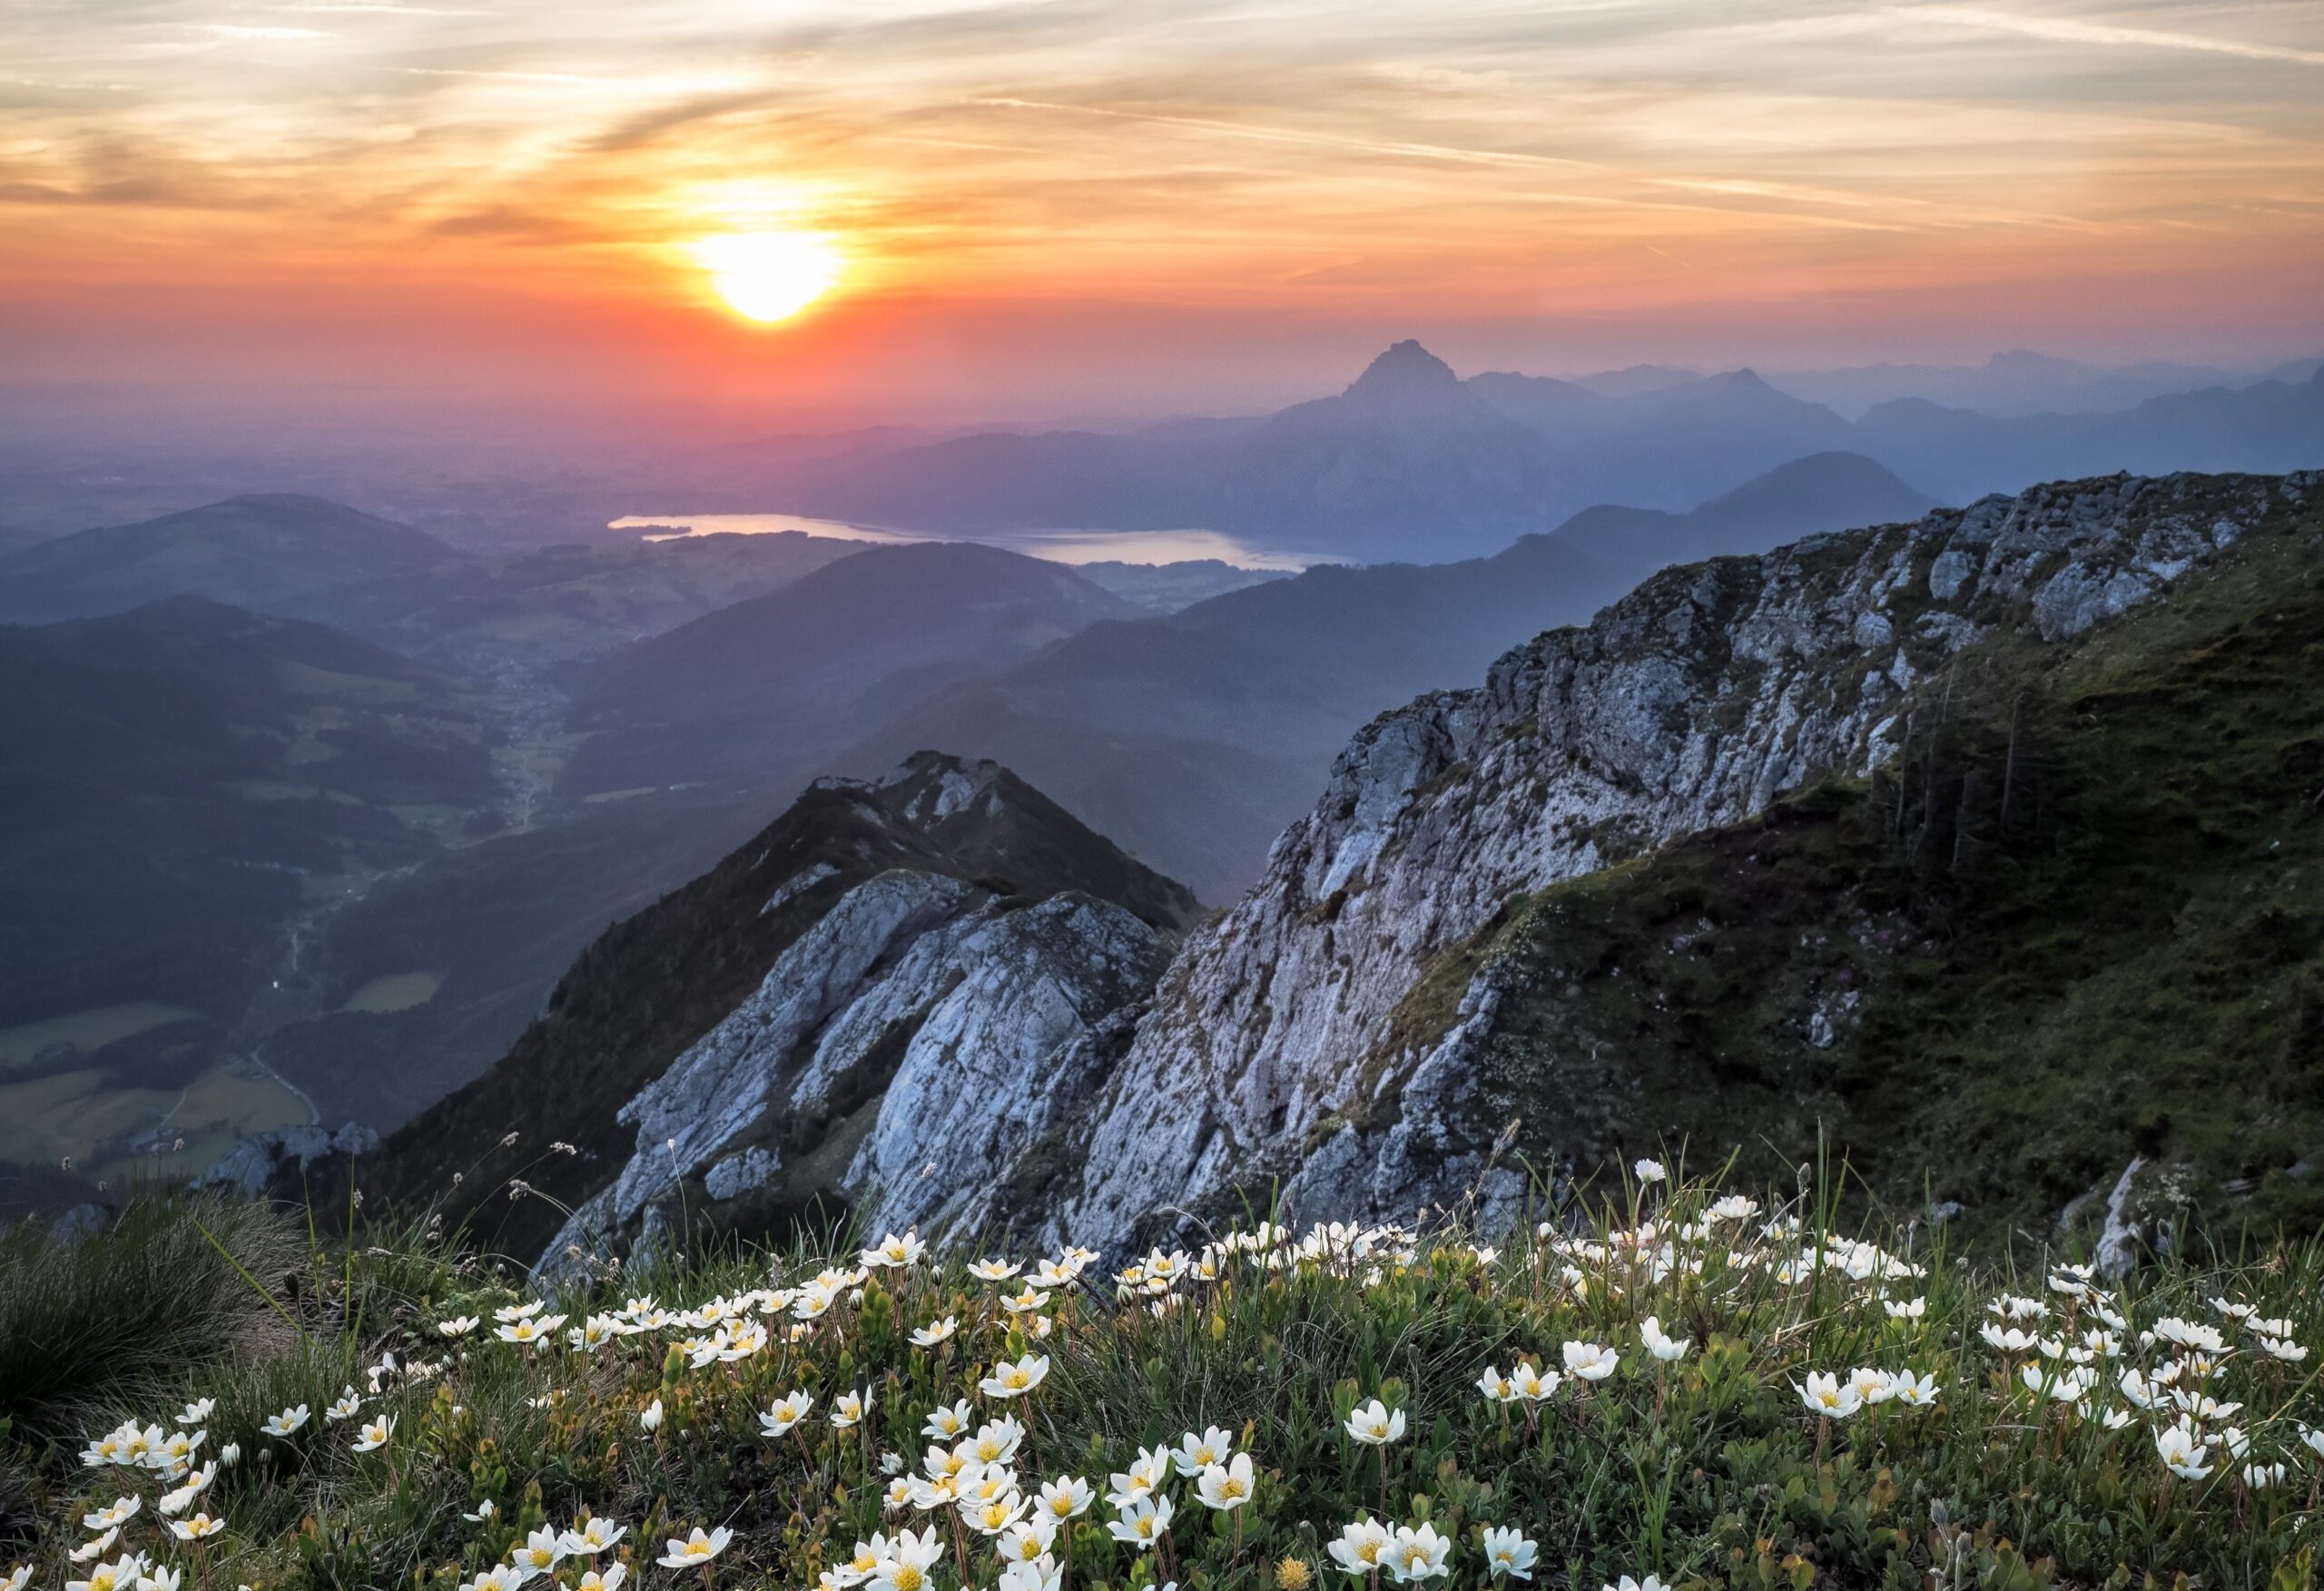 A beautiful scene from atop a mountain with little white daisies growing on it and a sprawling mountain range spanning below, a small body of water in the distance as the sun is setting over the horizon.